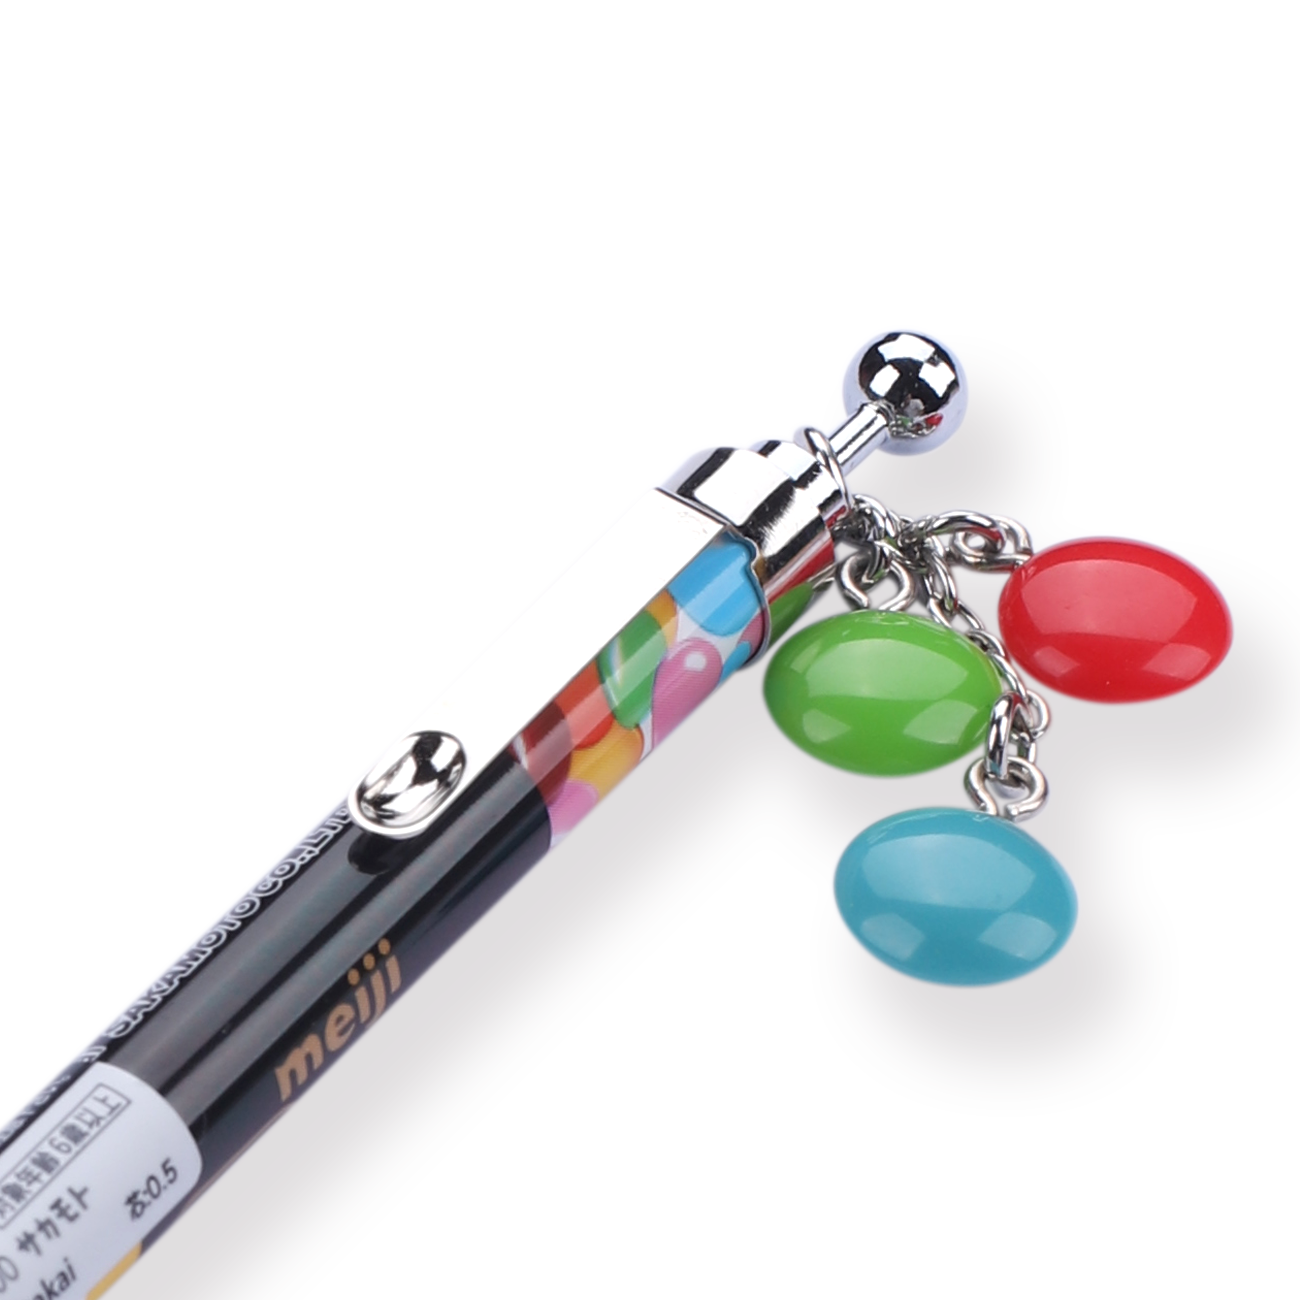 Four Candies 0.5mm Mechanical Pencil Set with Case - Nepal